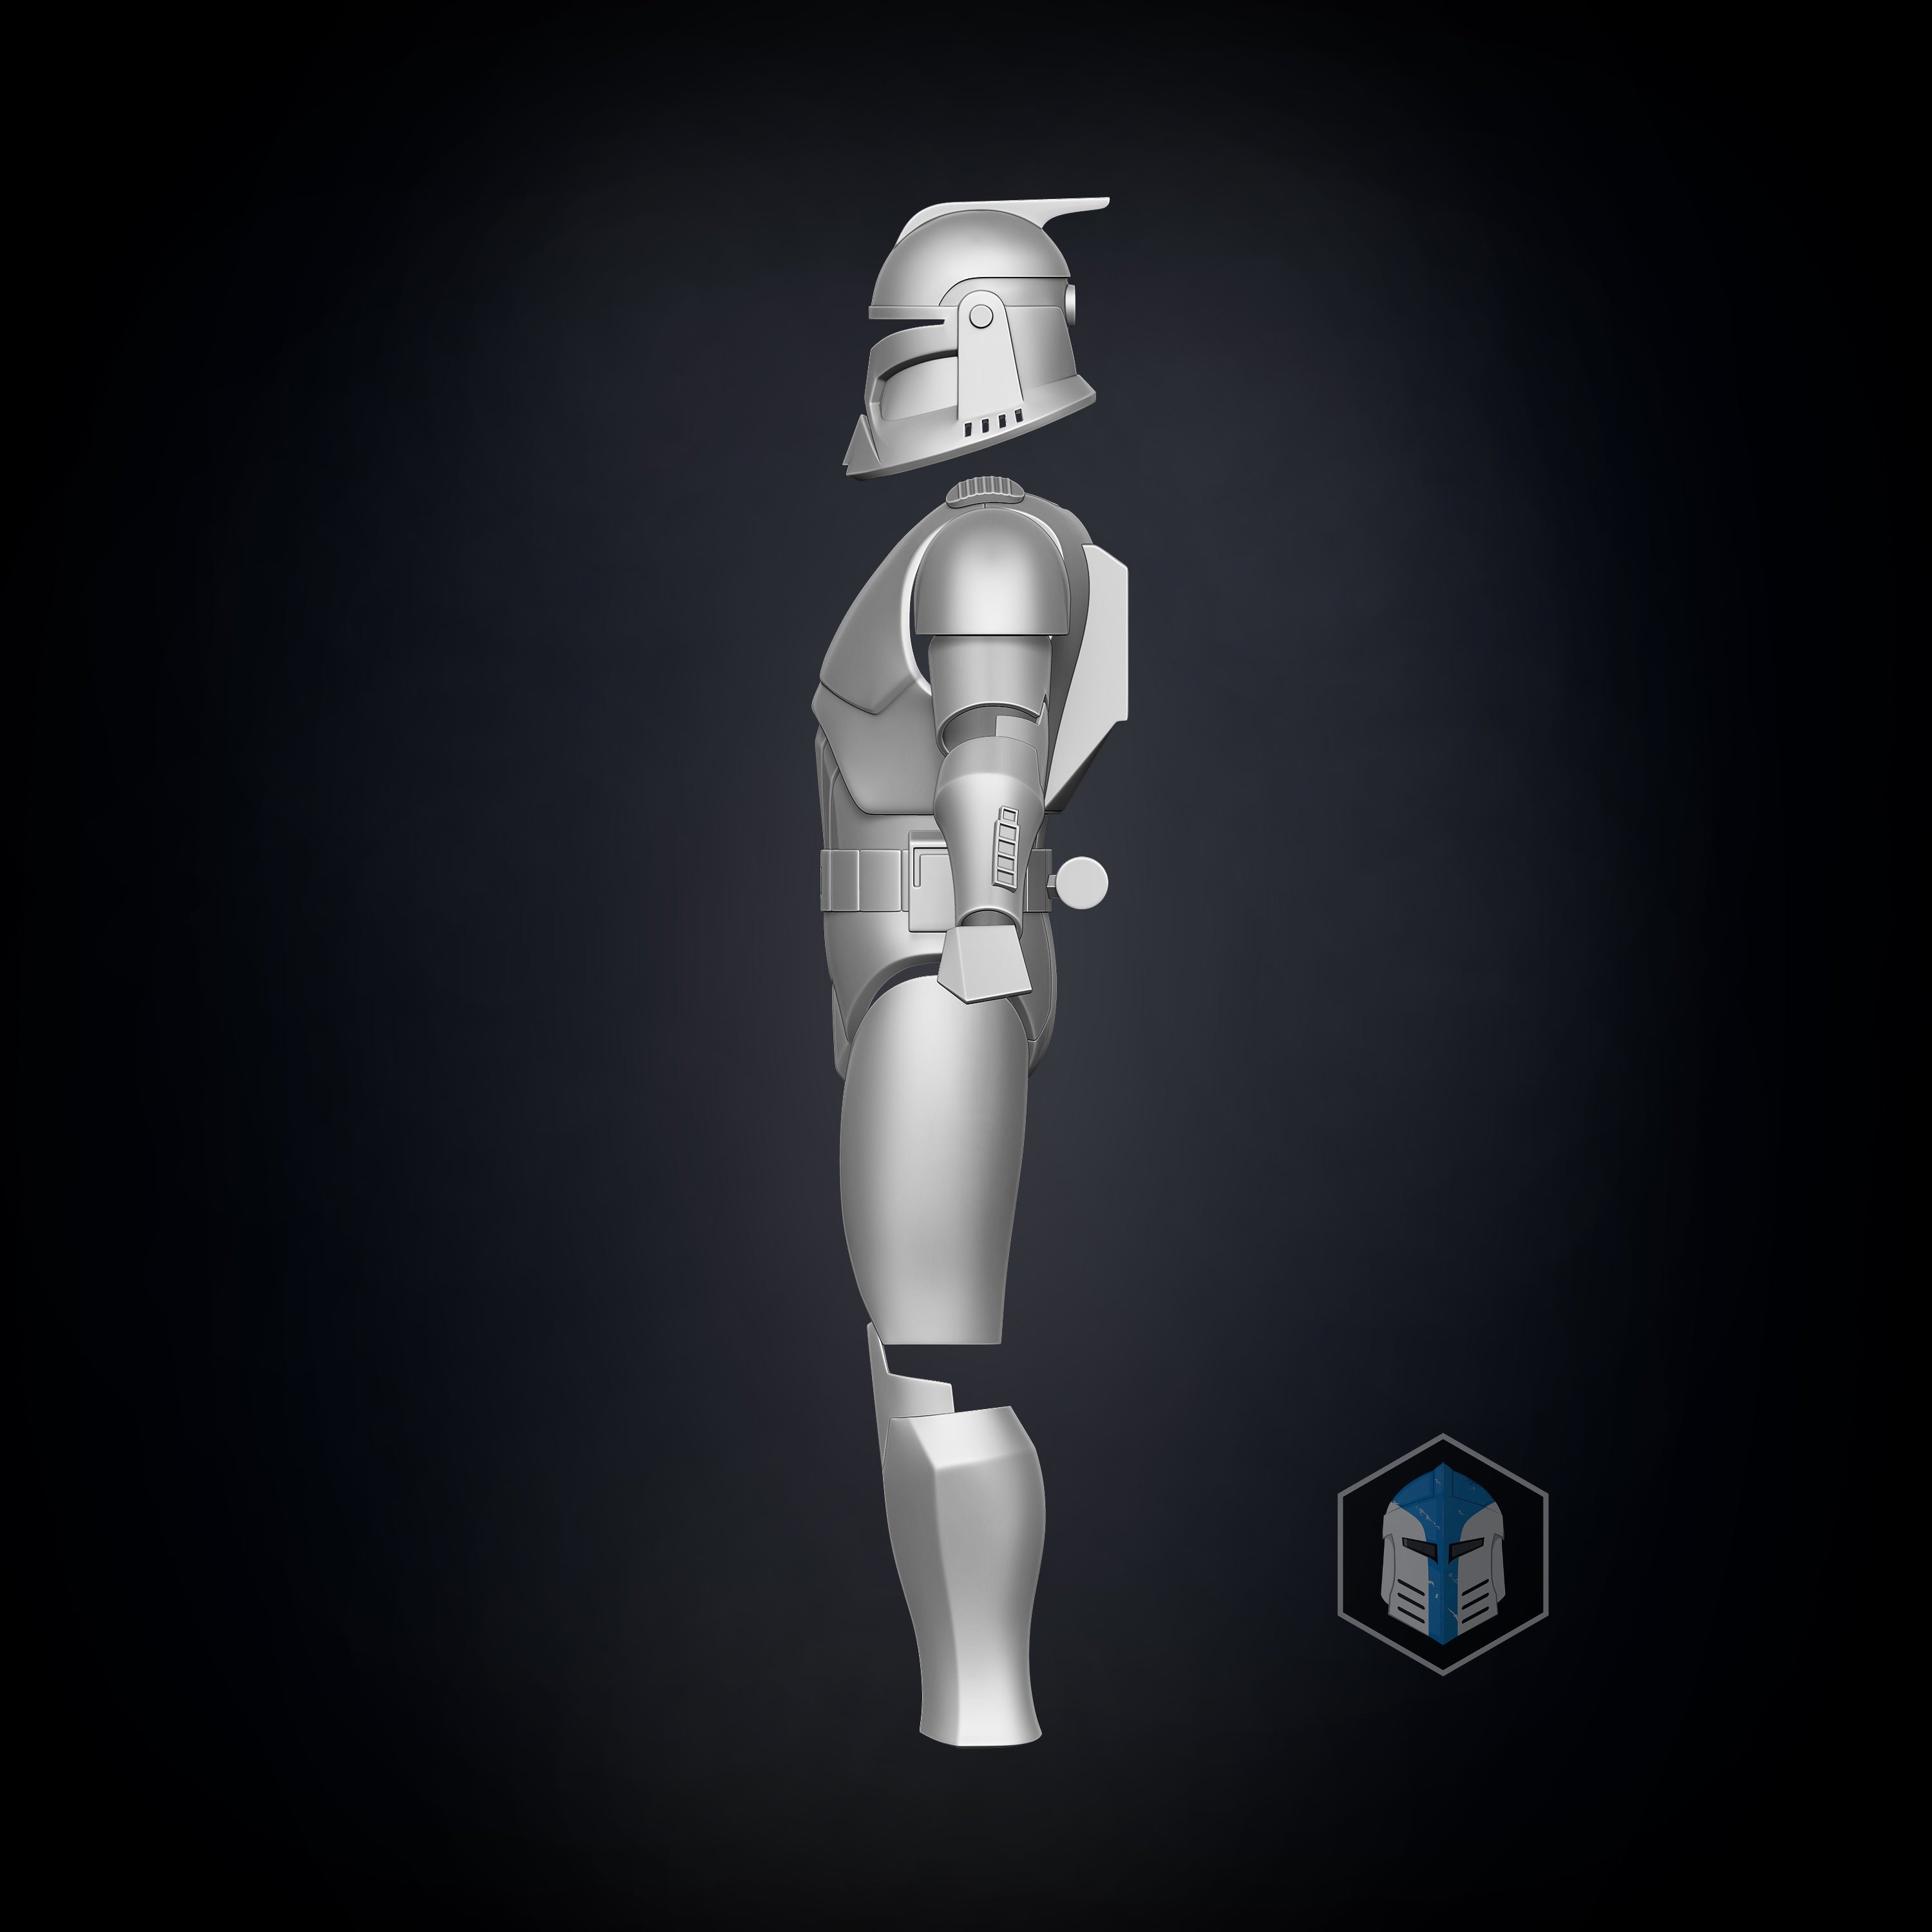 Phase 1 Animated Clone Trooper Armor - 3D Print Files - Galactic Armory